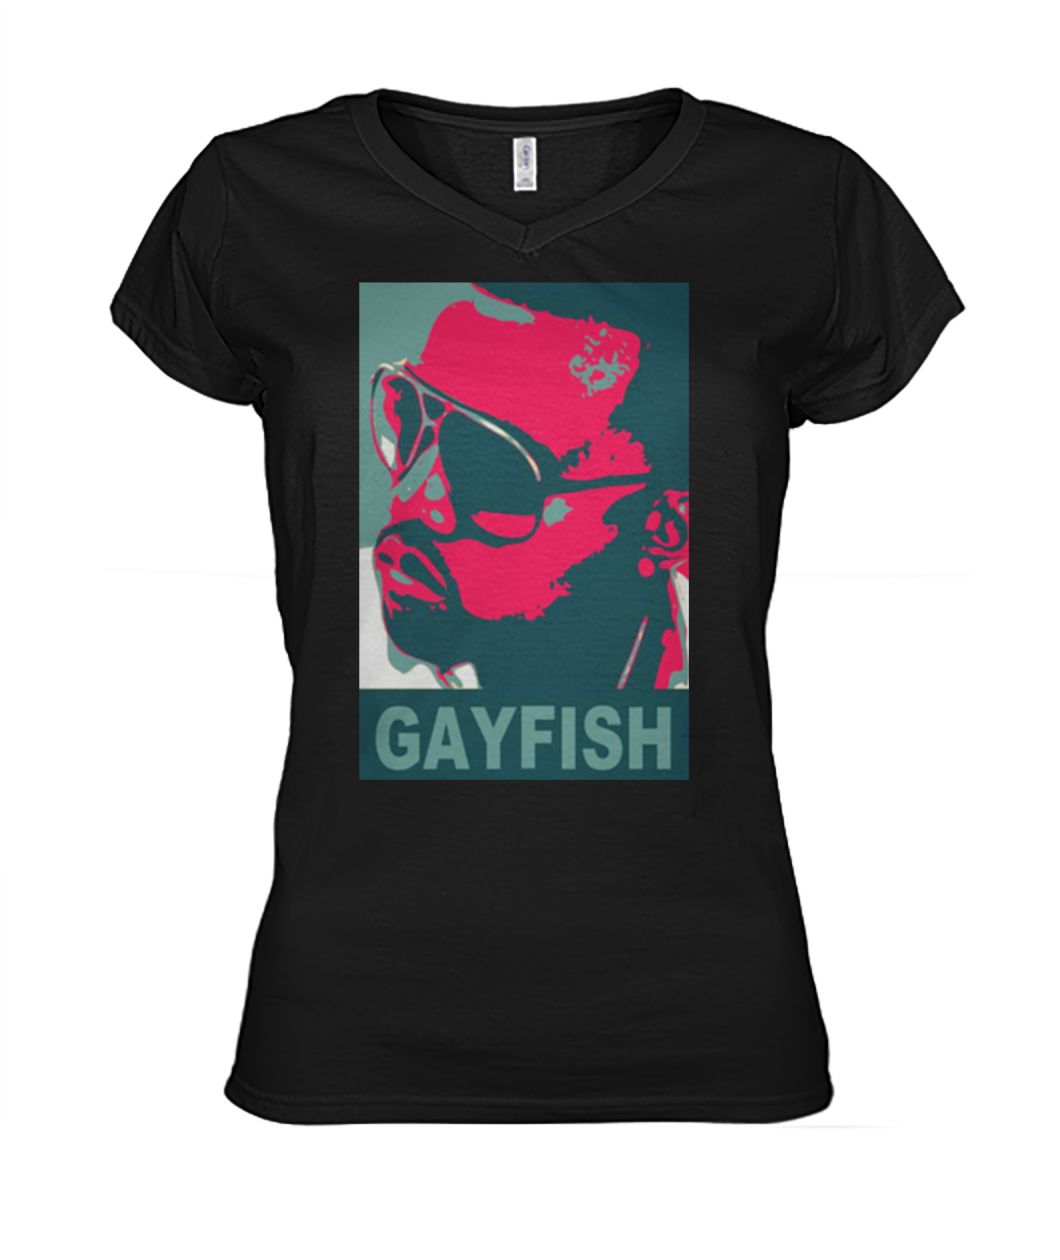 South park kanye west is a gay fish women's v-neck